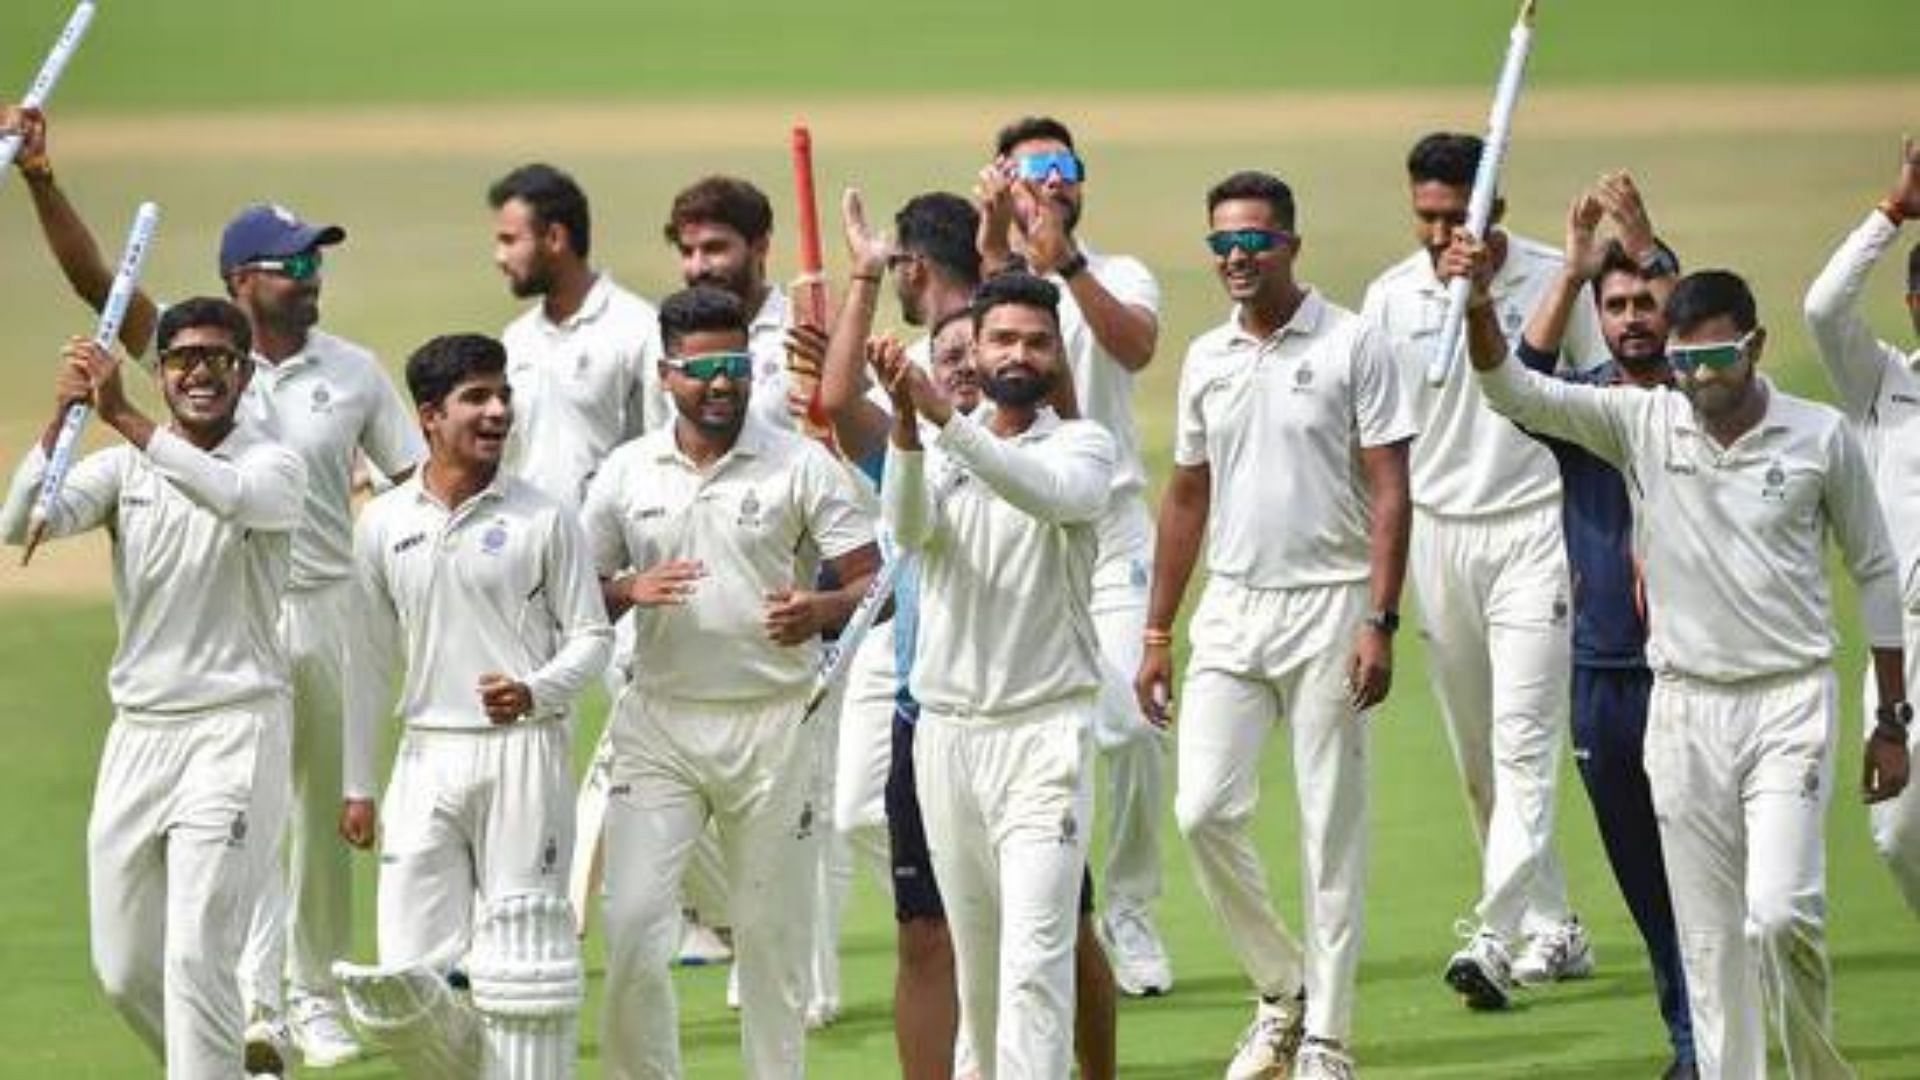 Kumar Kartikeya and other MP players celebrating after historic Ranji Trophy title. (P.C.:BCCI)